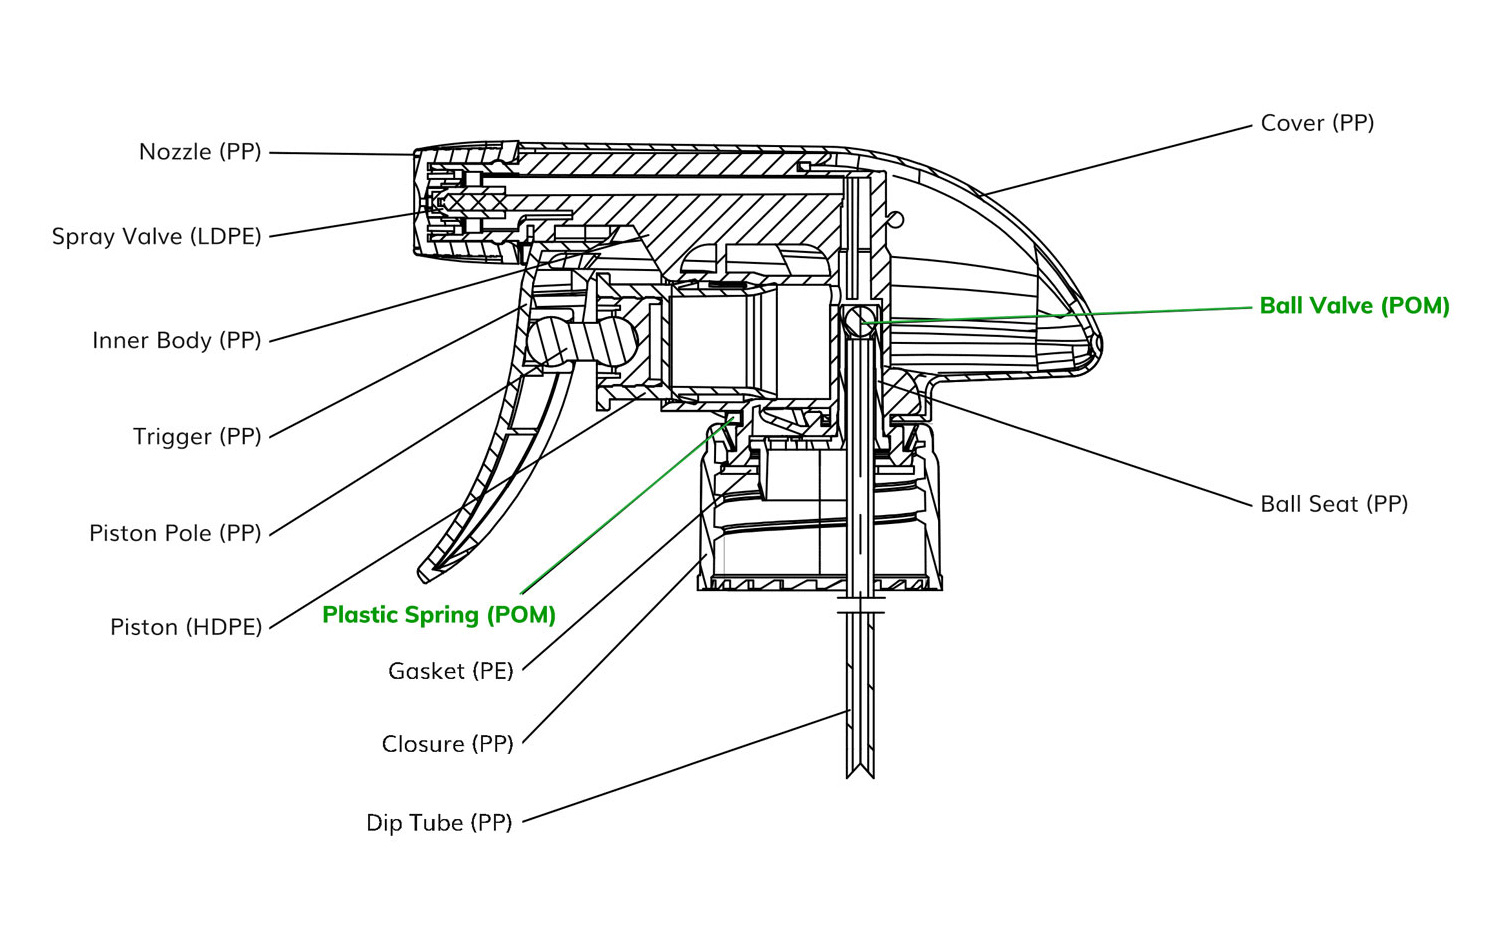 Sectional view of all plastic trigger sprayer